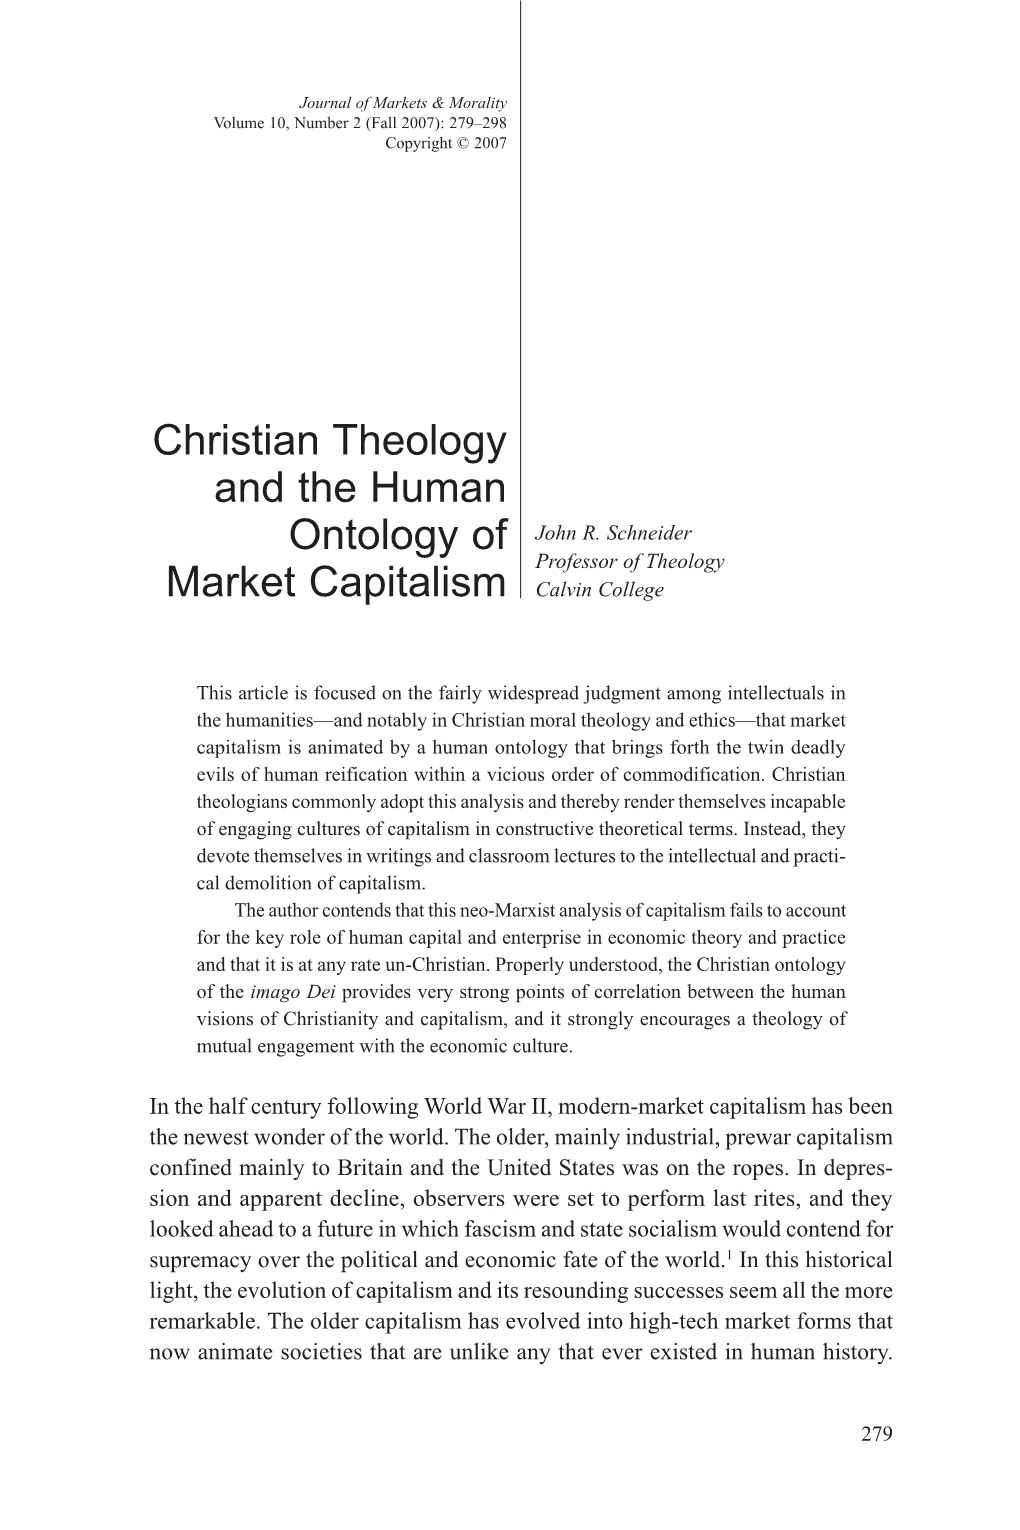 Christian Theology and the Human Ontology of Market Capitalism Sophisticated Theory to Help Guide Them Through the Complexities of Modern Economic Life